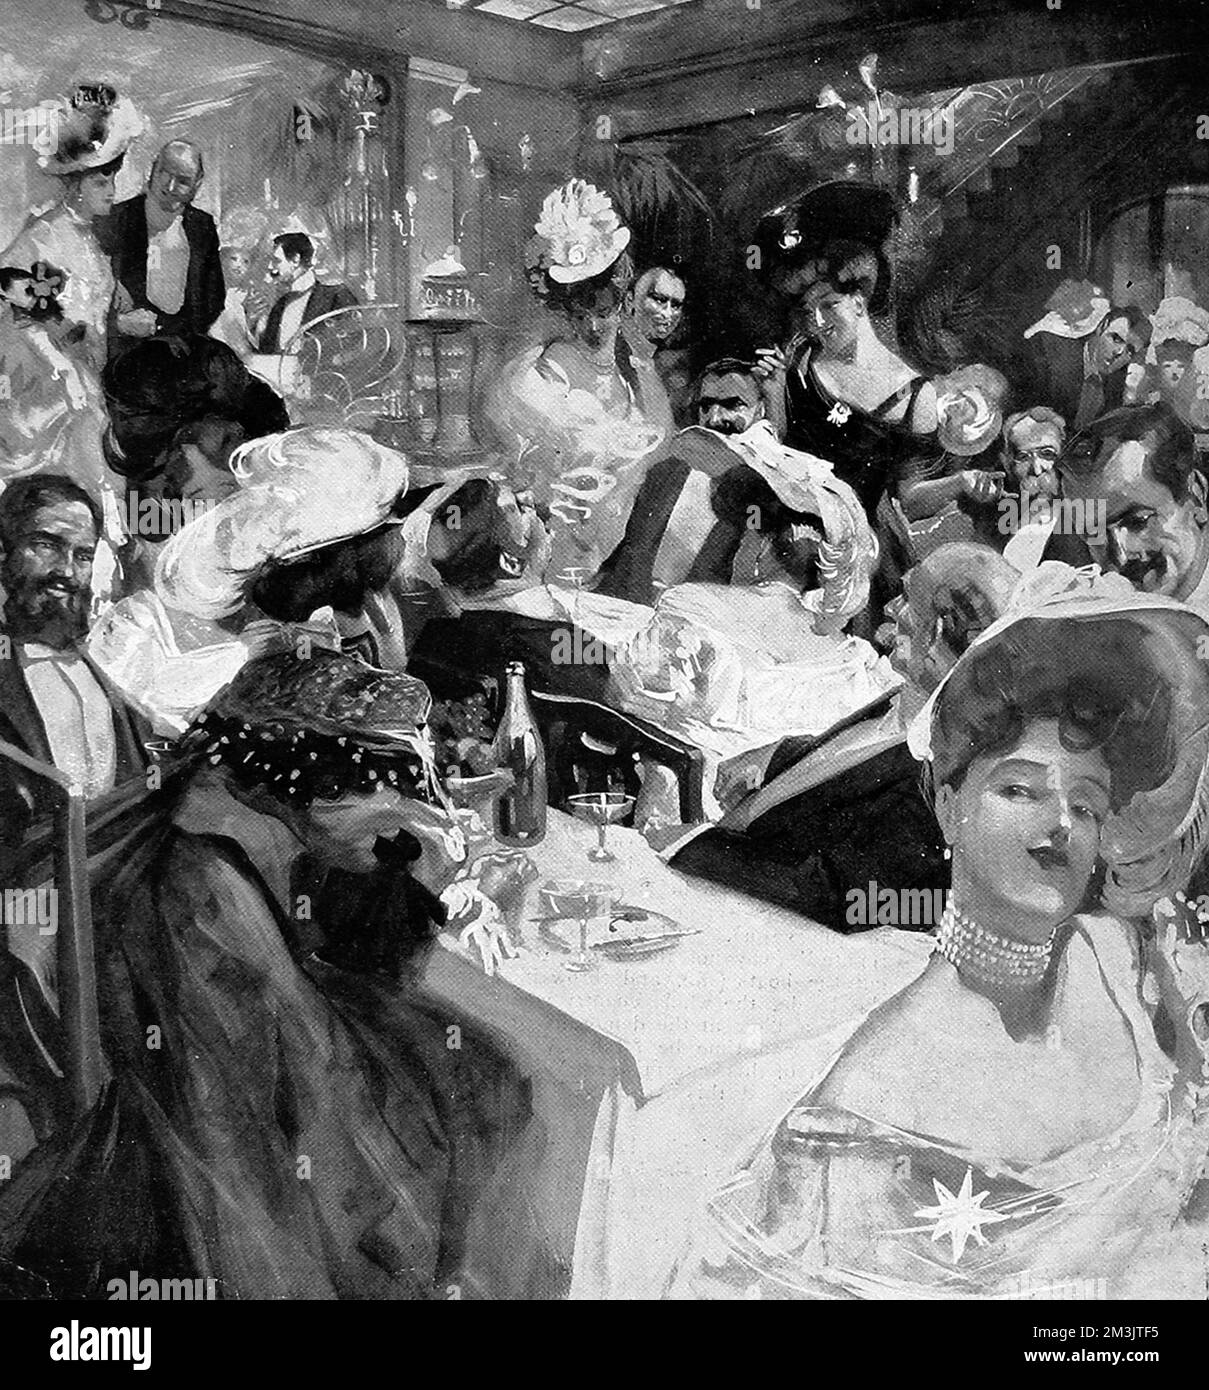 Christmas Eve at the Parisian restaurant, Maxim's. Maxim's was founded by Maxime Gaillard on April 23rd 1893 becoming Paris' most celebrated and fashionable restaurant.     Date: 1907 Stock Photo